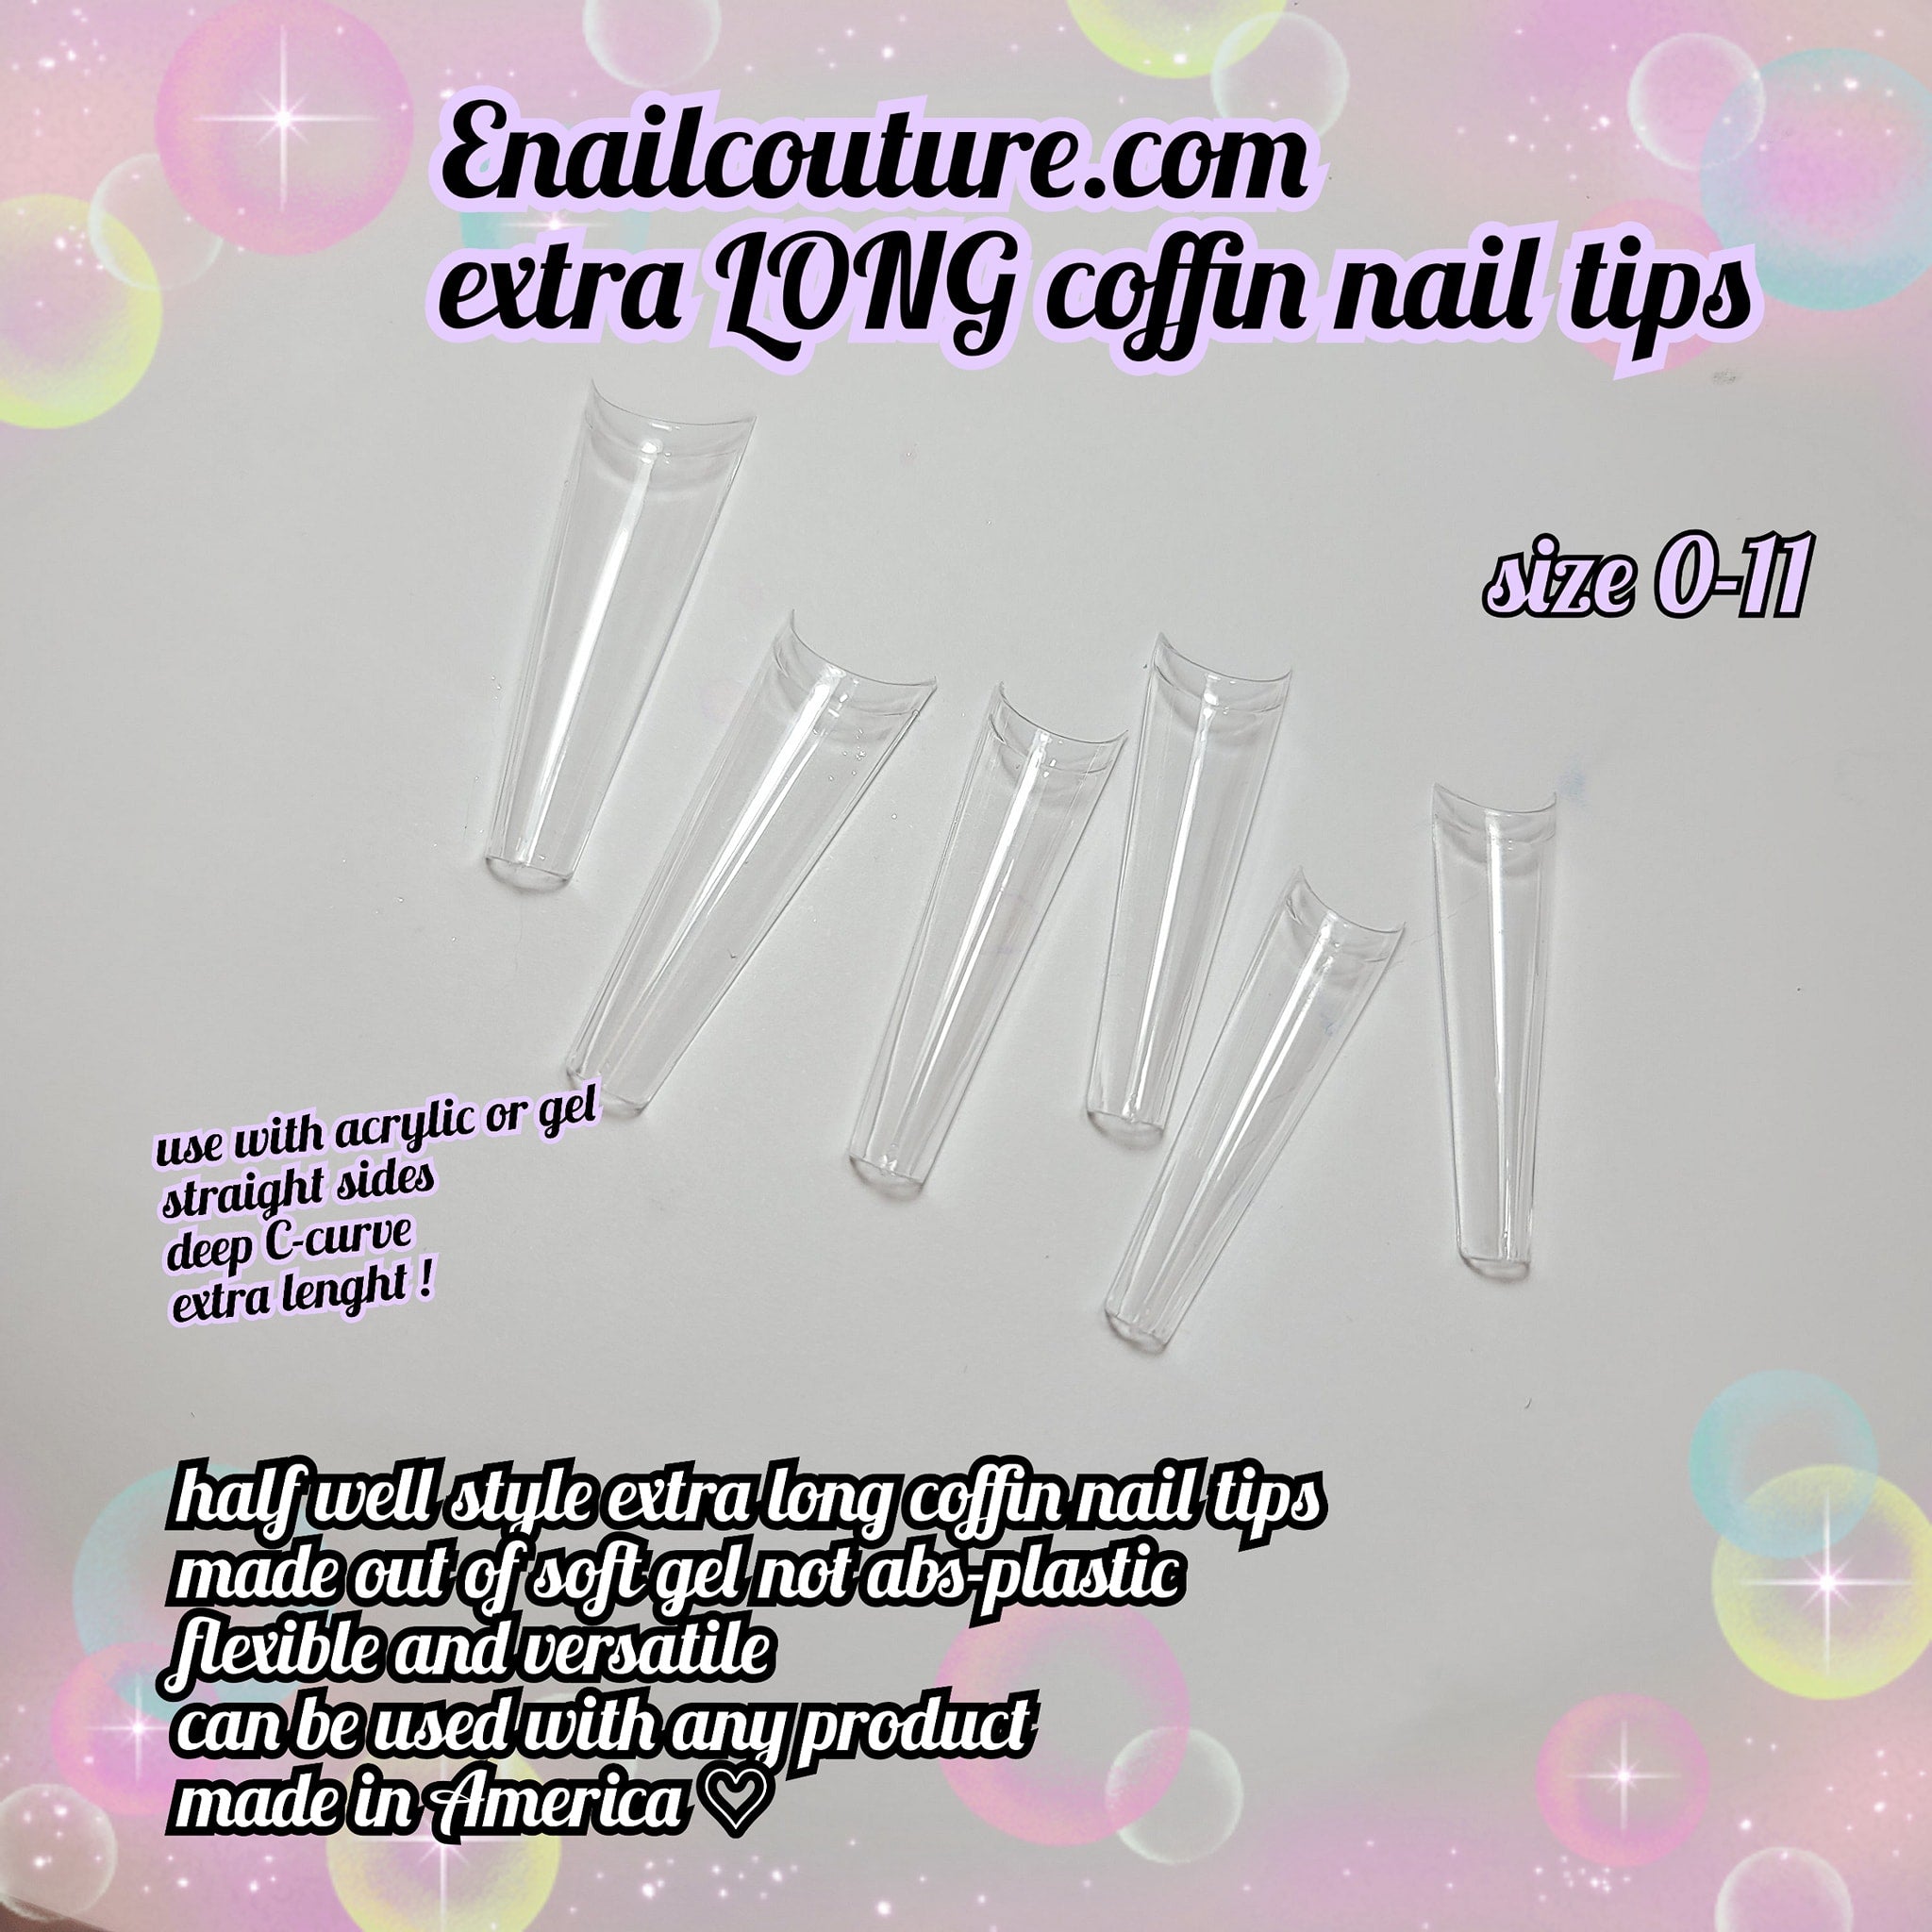 Extra Long Coffin Nail tips (XXL Coffin Nail Tips Clear Acrylic Nail Tips Half Cover False Fake Nail Tips with Case for Nail Salons Home)